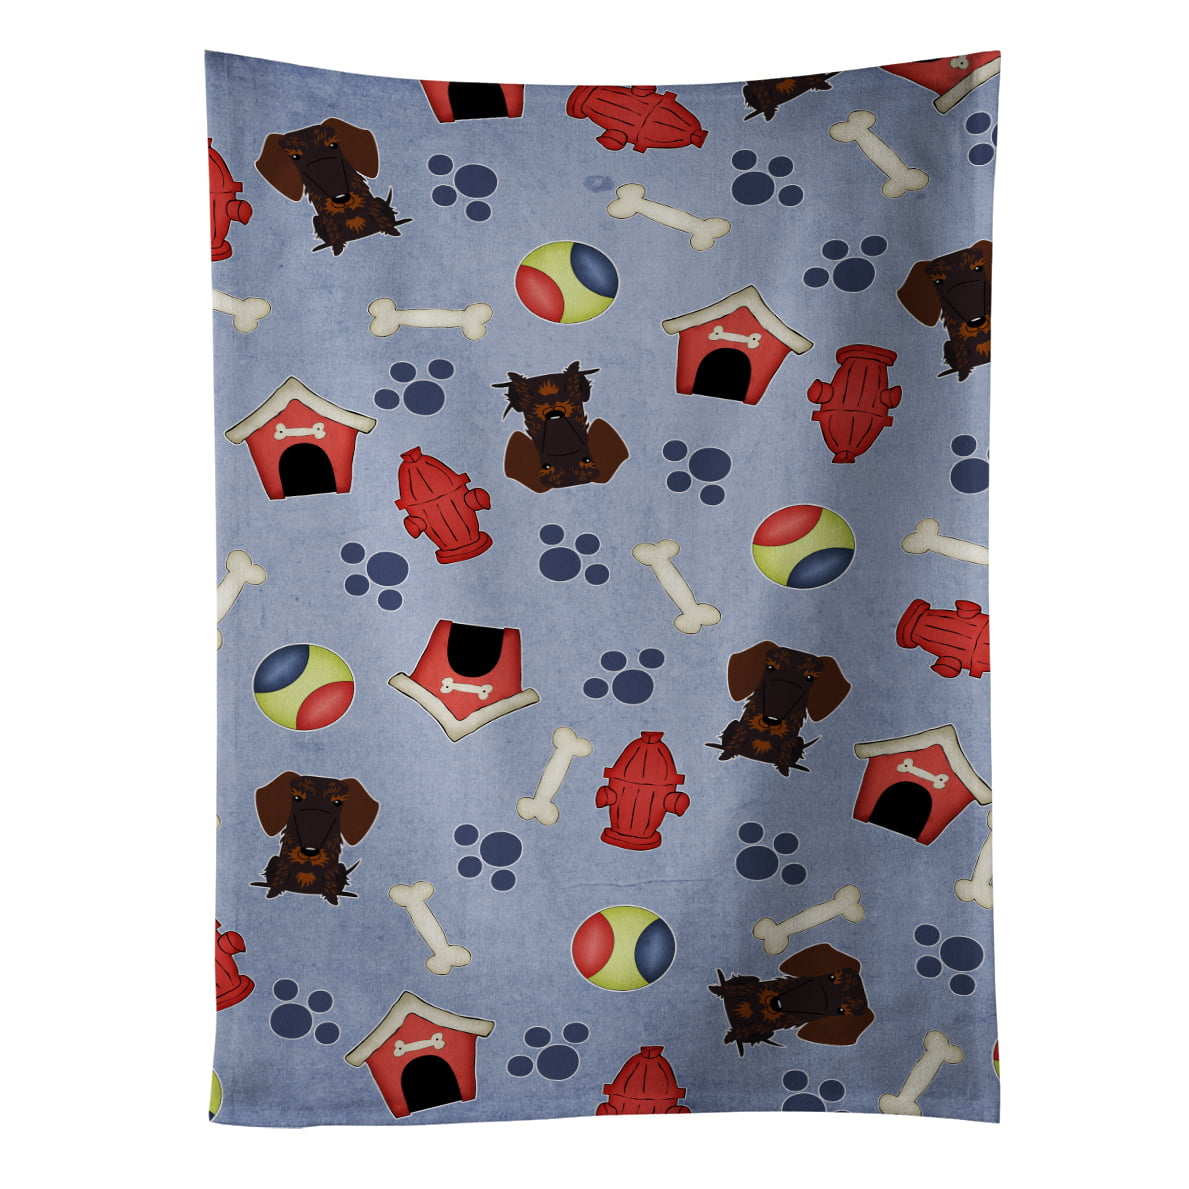 Caroline's Treasures "Caroline's Treasures BB2742KTWL Wire Haired Dachshund Chocolate Kitchen Towel, 25"" x 15"", Multicolor"